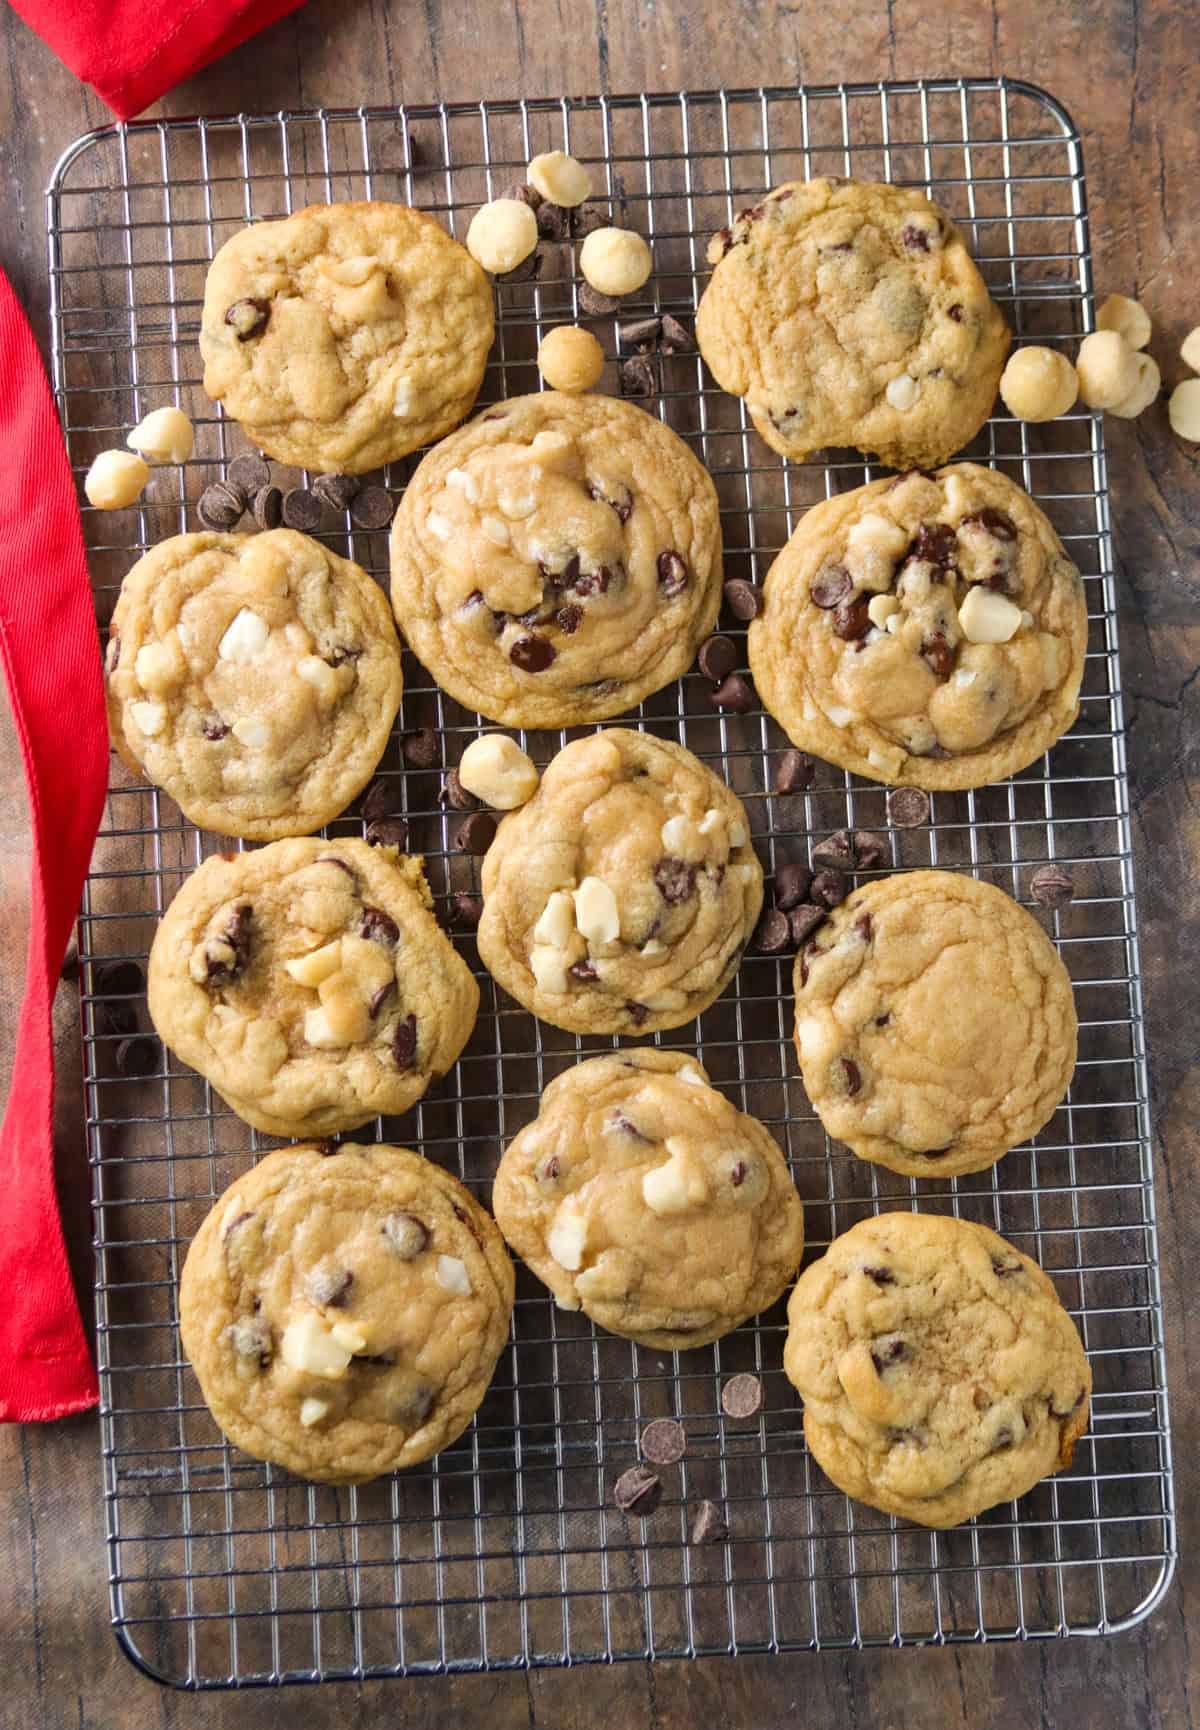 Chocolate chip macadamia nut cookies on a wire rack.